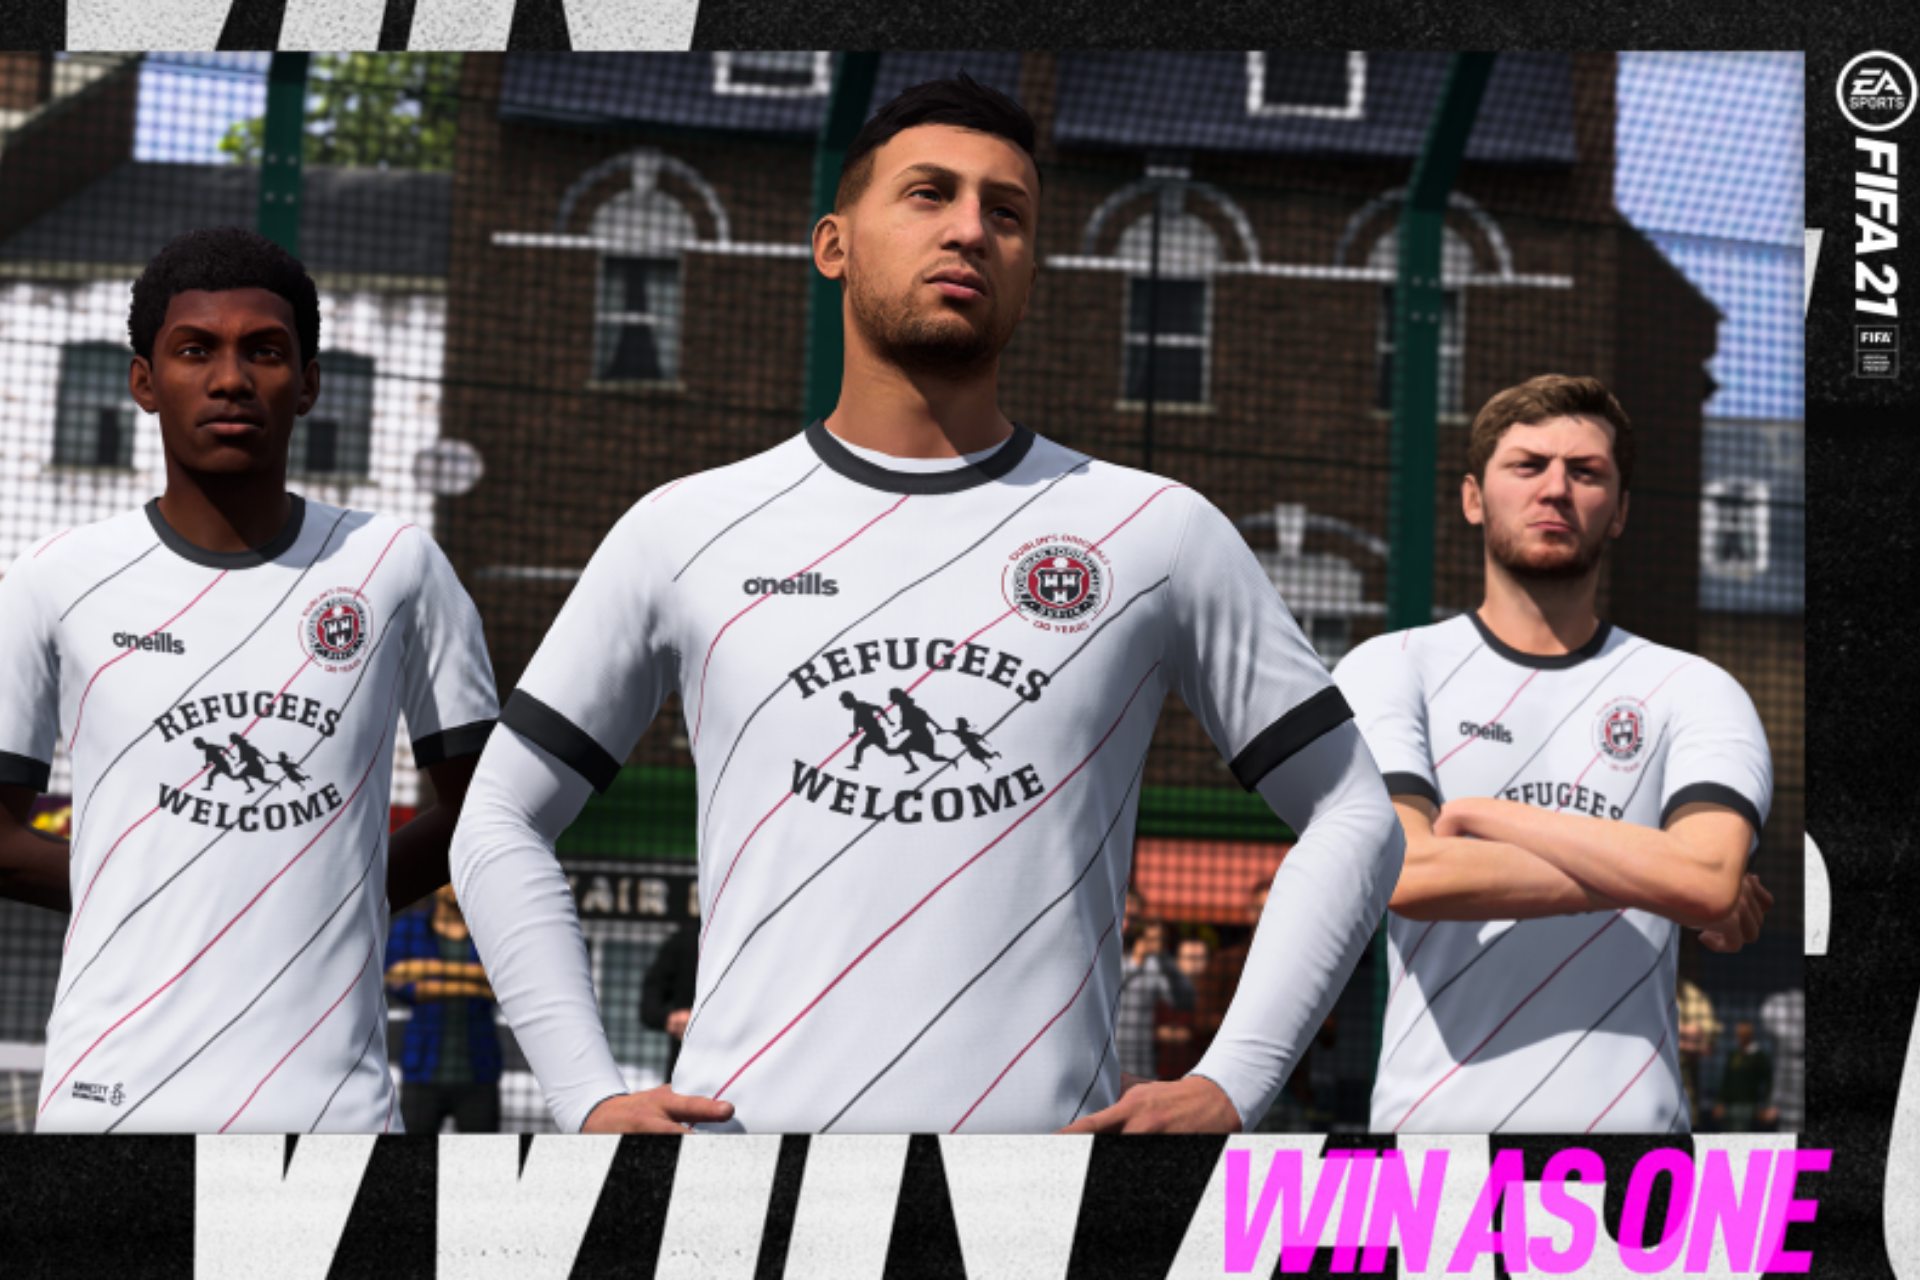 Bohemian FC's Refugees Welcome Jersey goes Global in FIFA 2021 Game -  European Football for Development Network